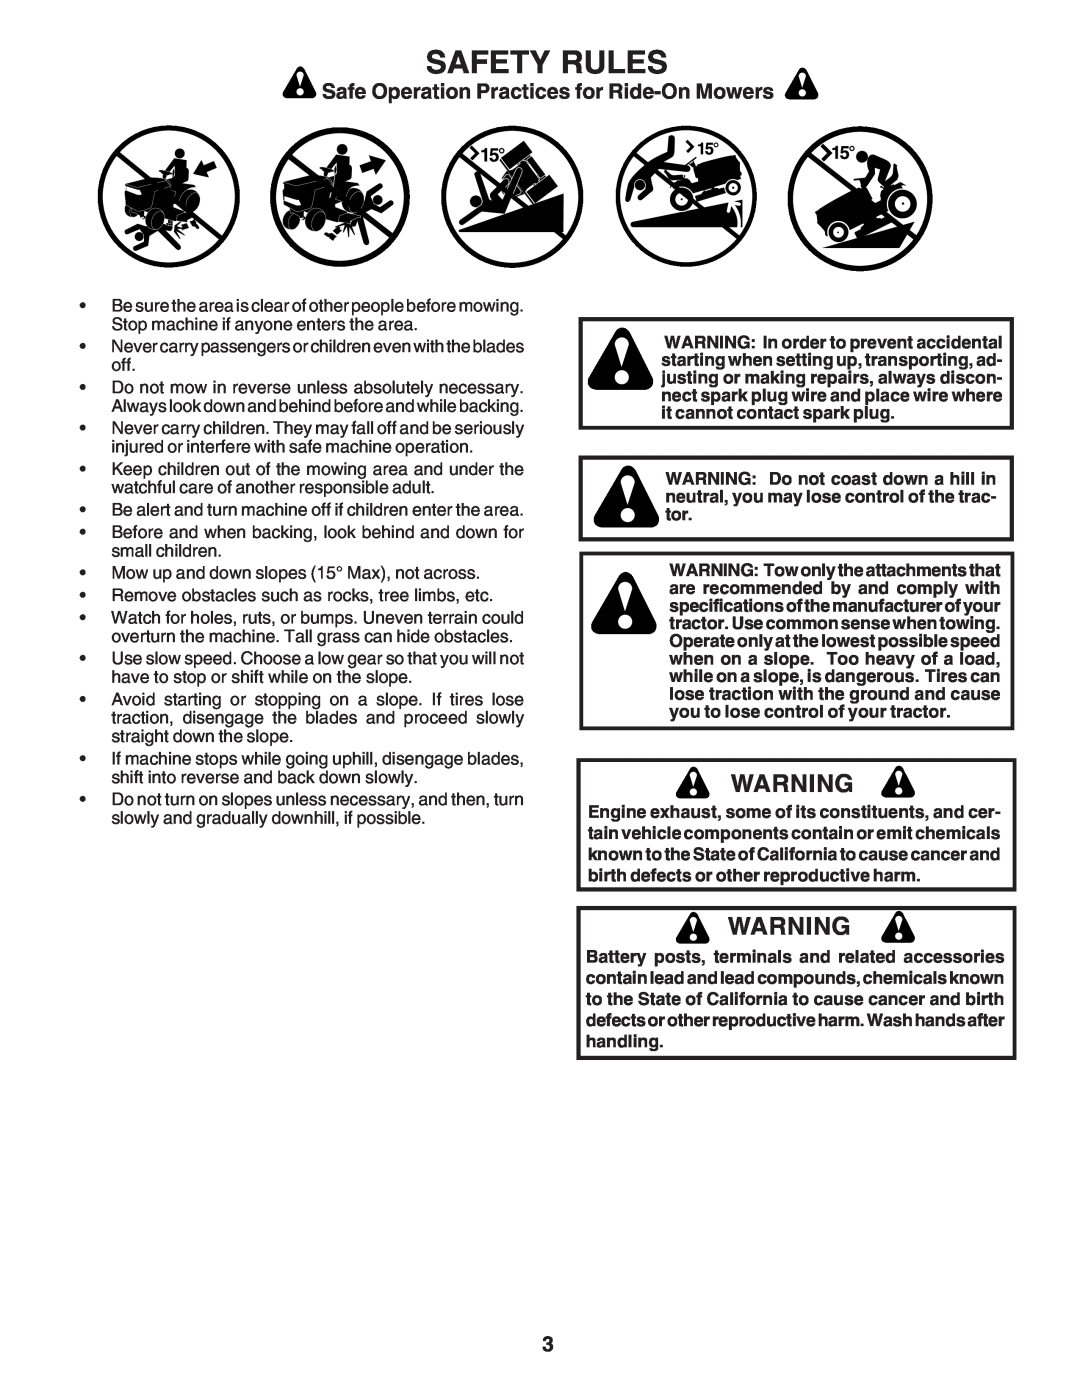 Poulan 183284 owner manual Safety Rules, Safe Operation Practices for Ride-On Mowers 